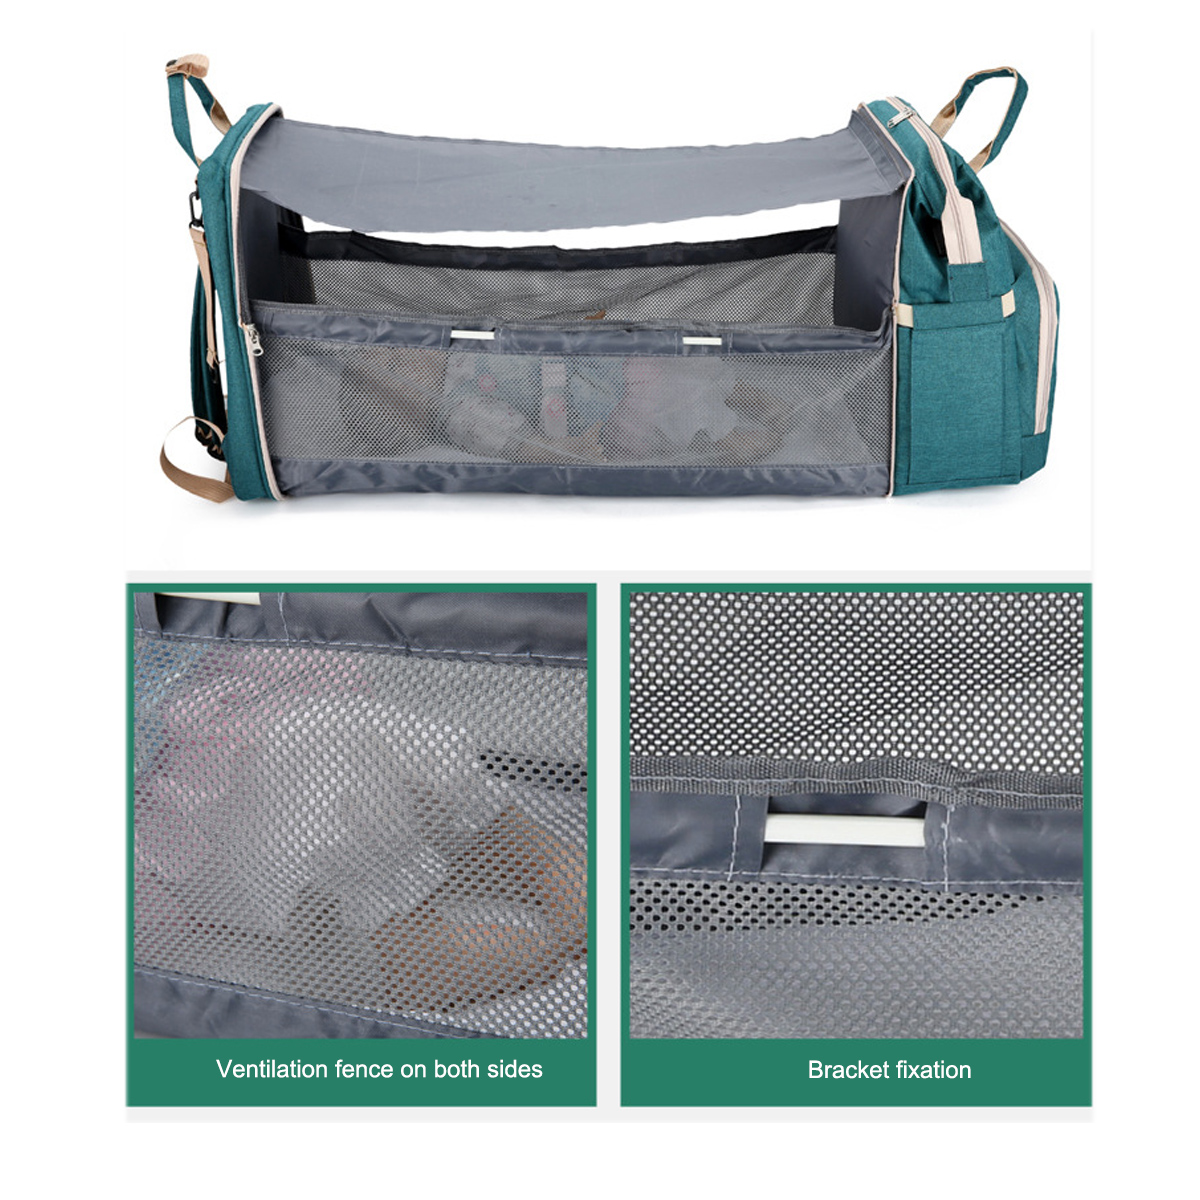 3-IN-1-Diaper-Bag--Baby-Crib-Backpack-Foldable-Nappy-Mommy-Bags-For-Mom-Dad-With-External-USB-Interf-1826523-15